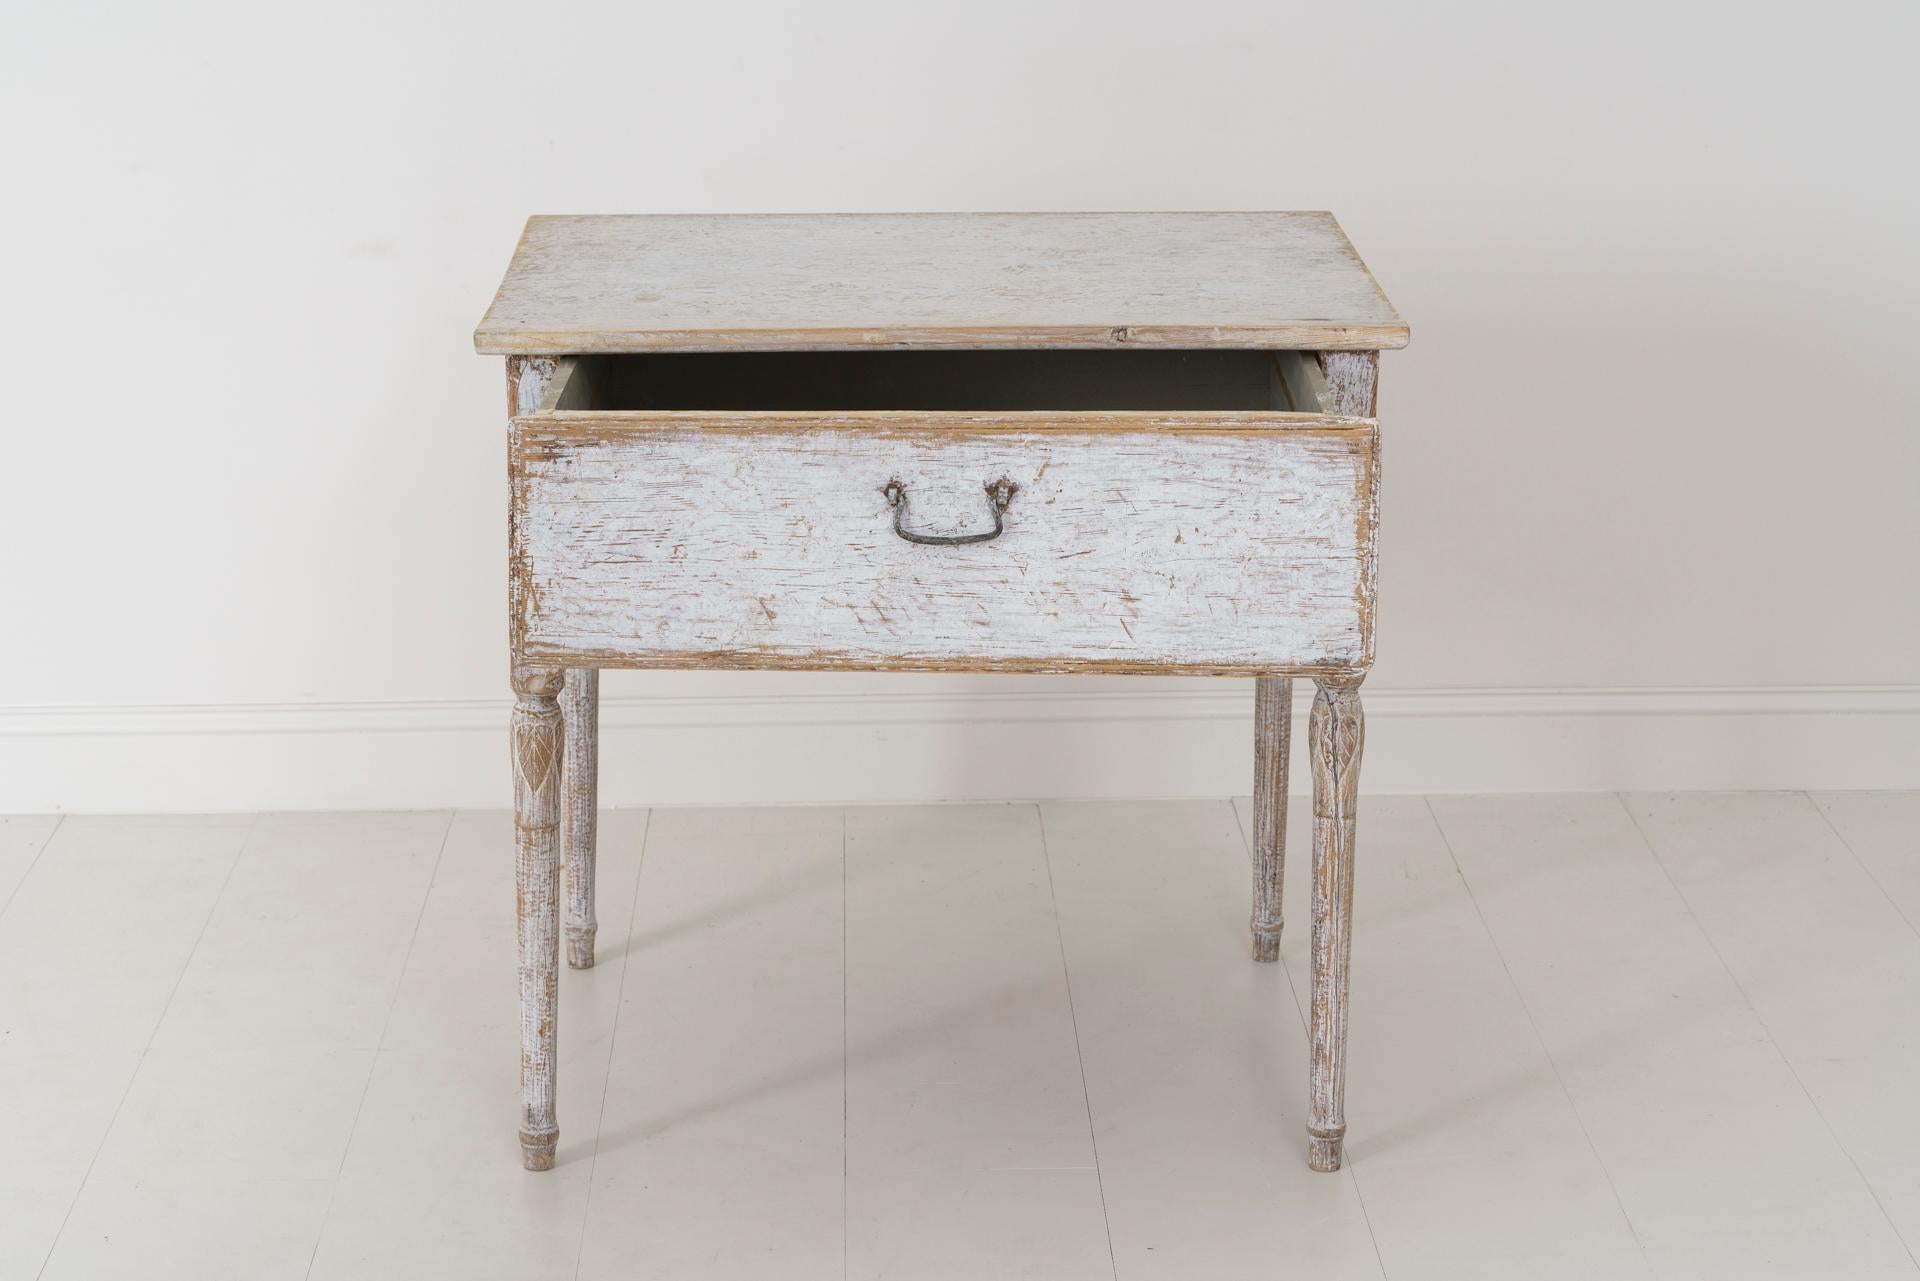 A charming 18th century Swedish center table from the Gustavian period. This rustic allmoge (country folk) table is finished on all four sides, has a deep drawer, elegant tapering legs, and leaf motif moldings.